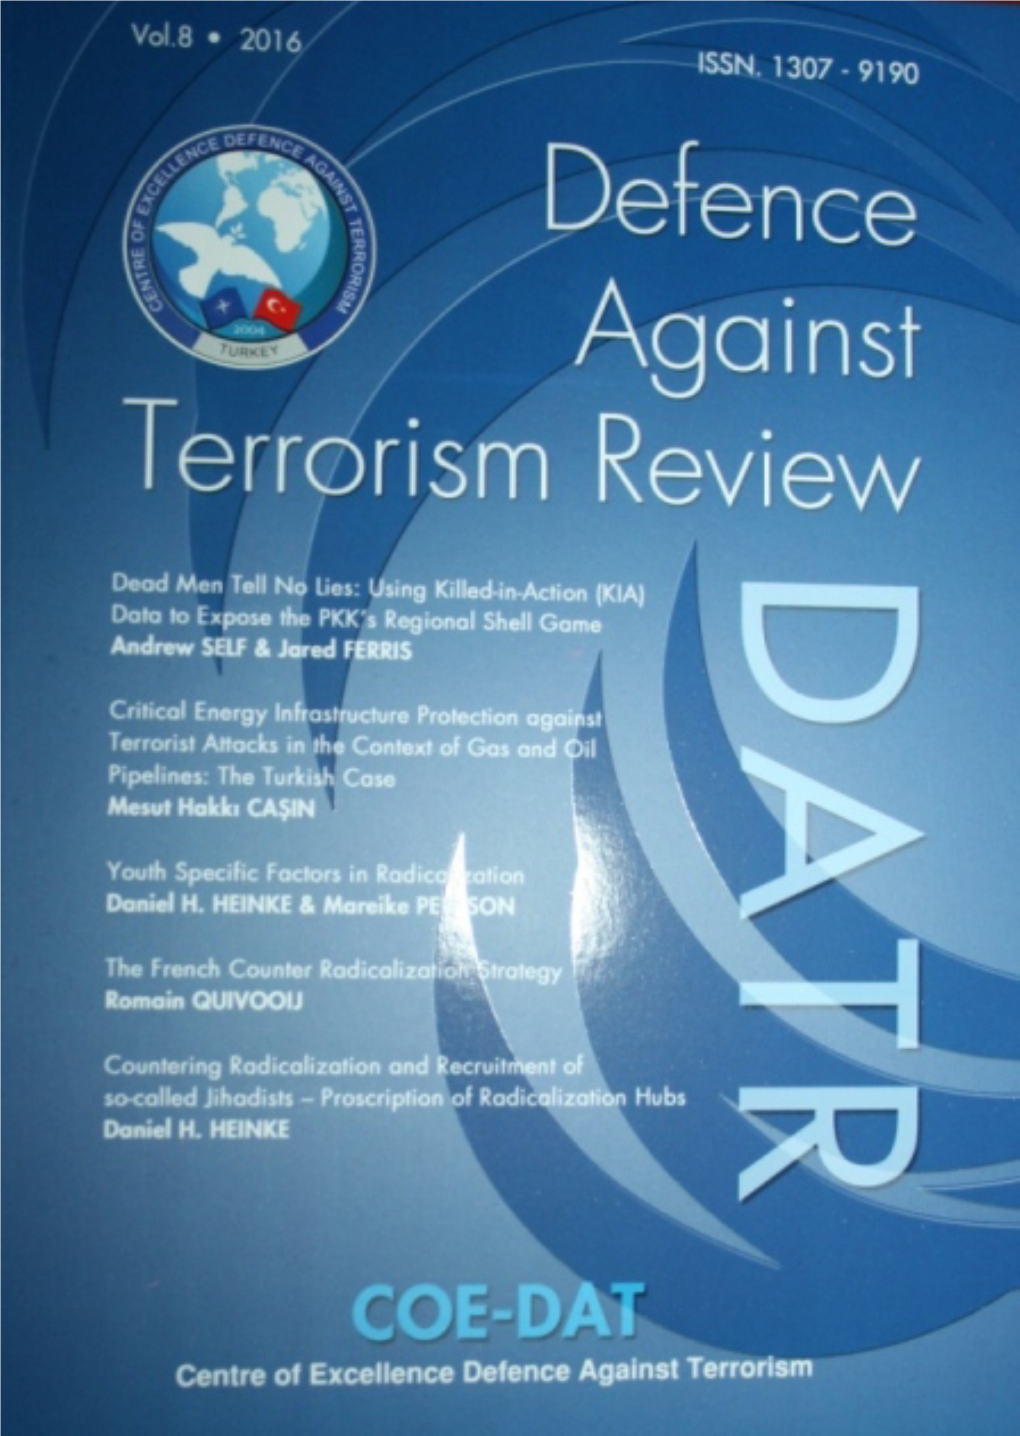 Defence Against Terrorism Review Vol.8 2016